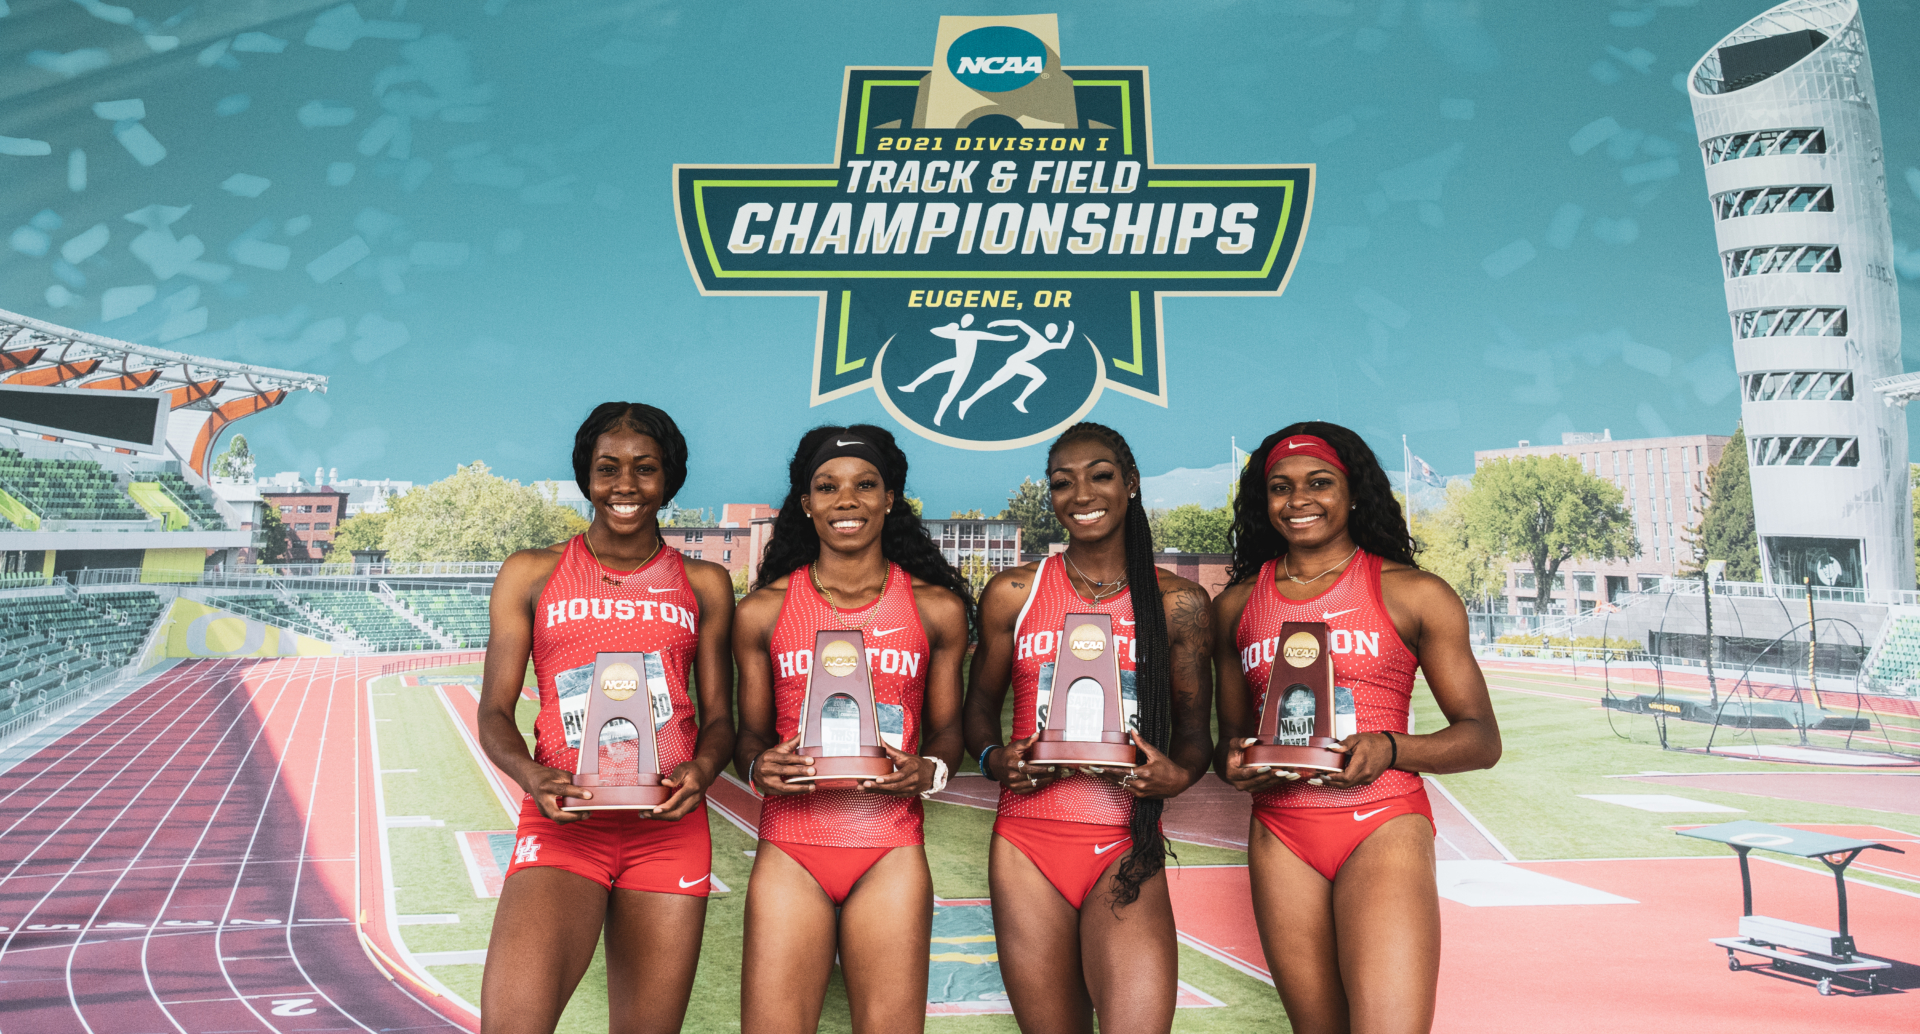 The UH women's 4x100-meter relay team consisting of freshman Camille Rutherford and senior Naomi Taylor and graduate students Samiyah Samuels, and Tristan Evelyn scored the first points for the Cougars women's team at the NCAA Outdoor Championships since 2012. | Courtesy of UH athletics